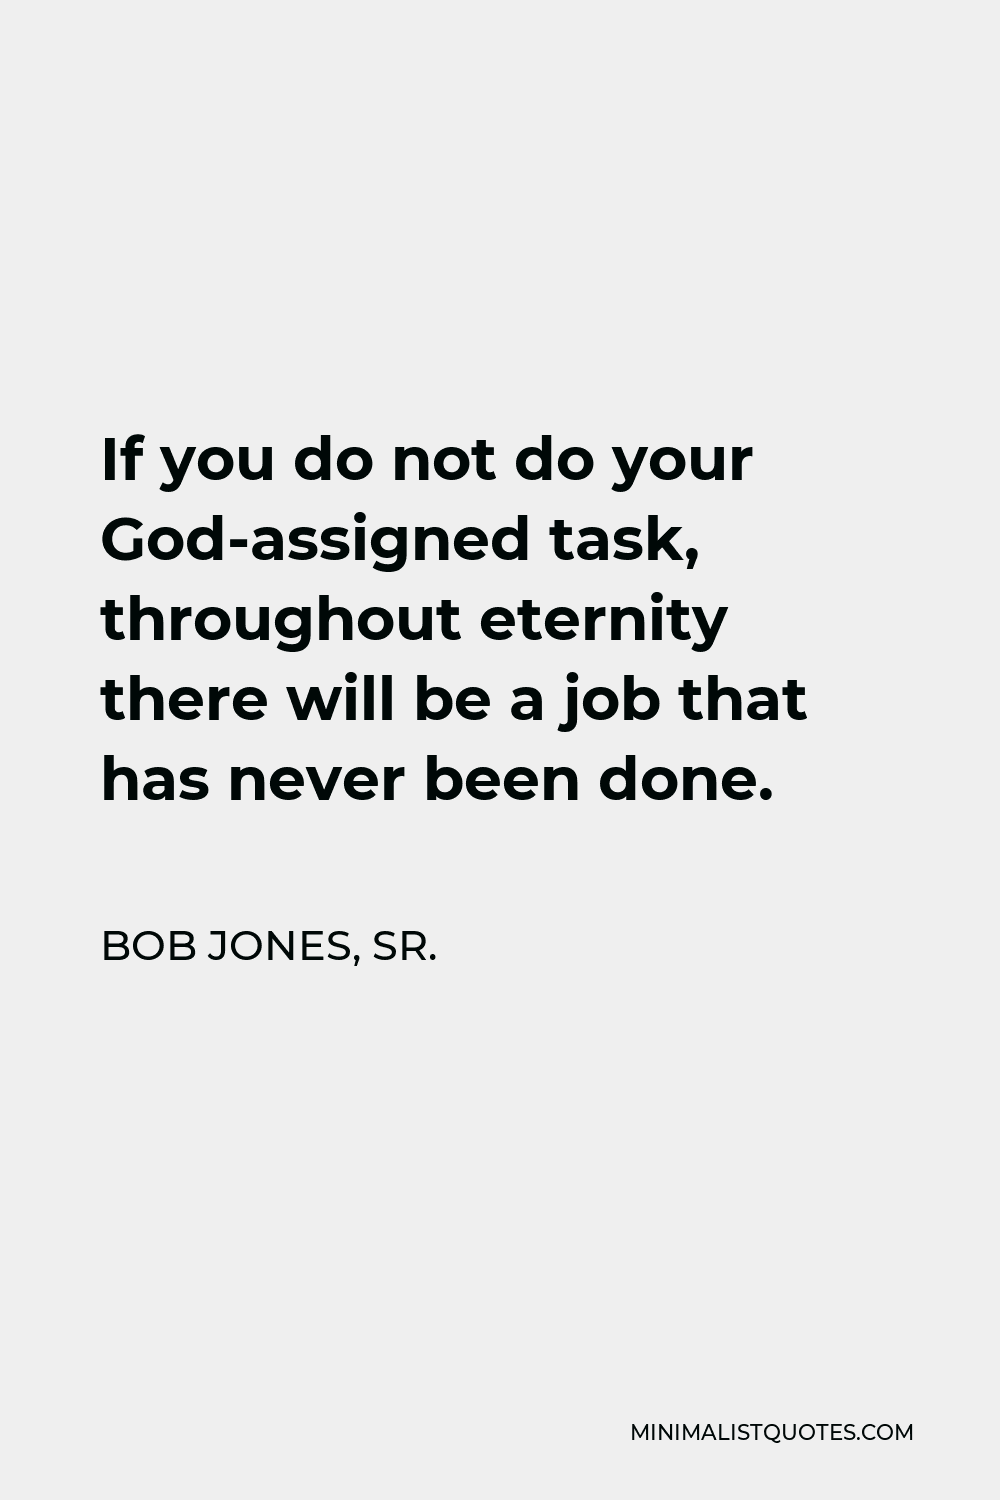 Bob Jones, Sr. Quote - If you do not do your God-assigned task, throughout eternity there will be a job that has never been done.